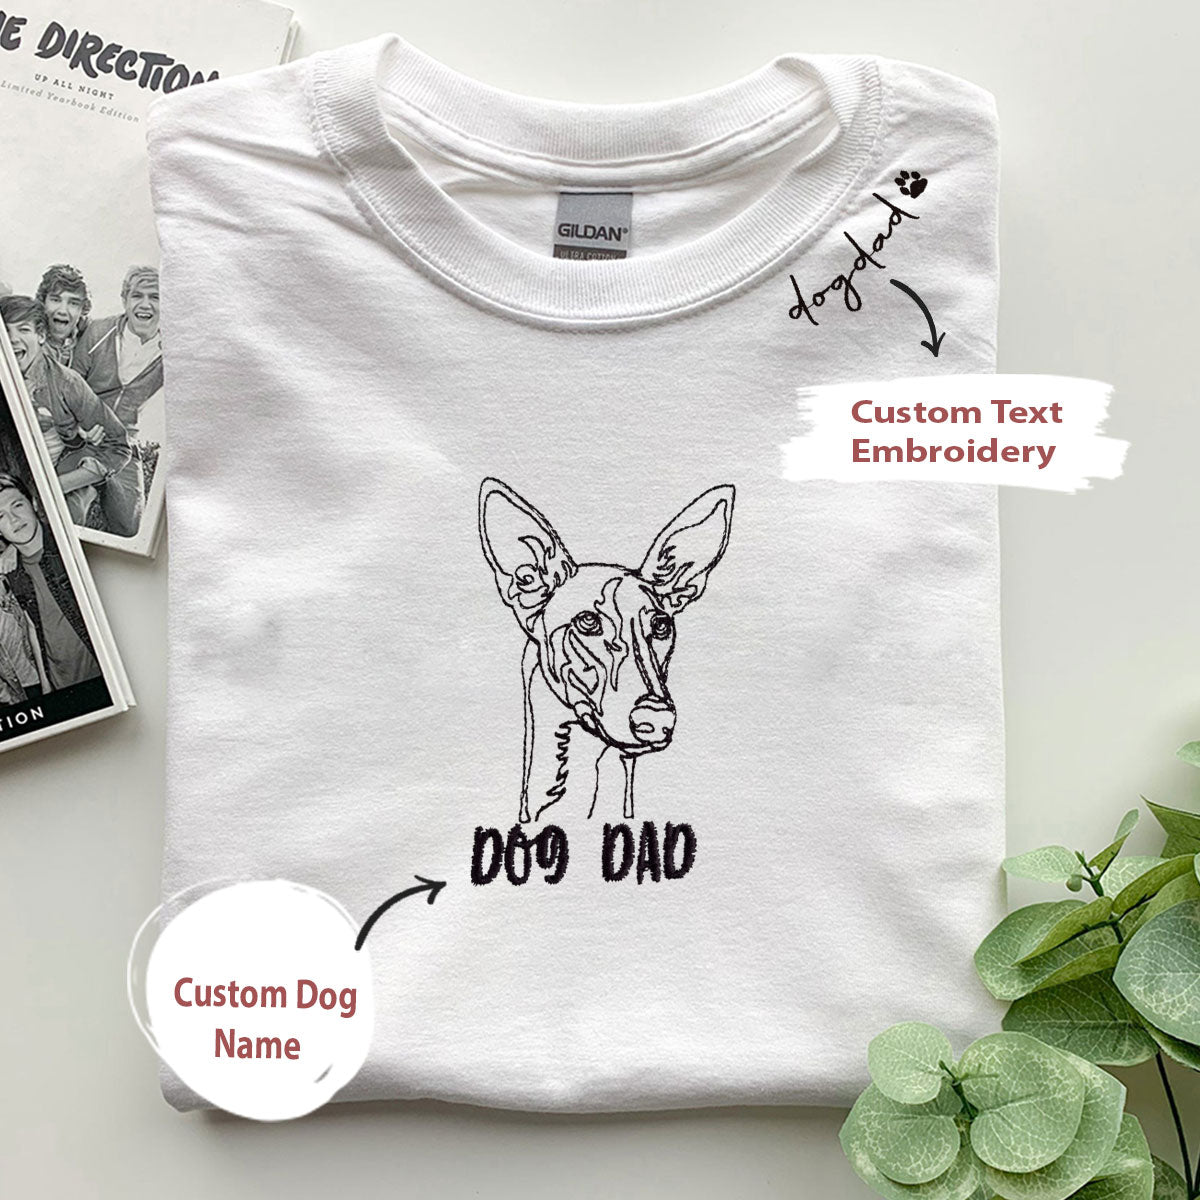 Personalized Italian Greyhound Dog Dad Shirt Embroidered Collar, Custom Shirt with Dog Name, Best Gifts For Greyhound Lovers